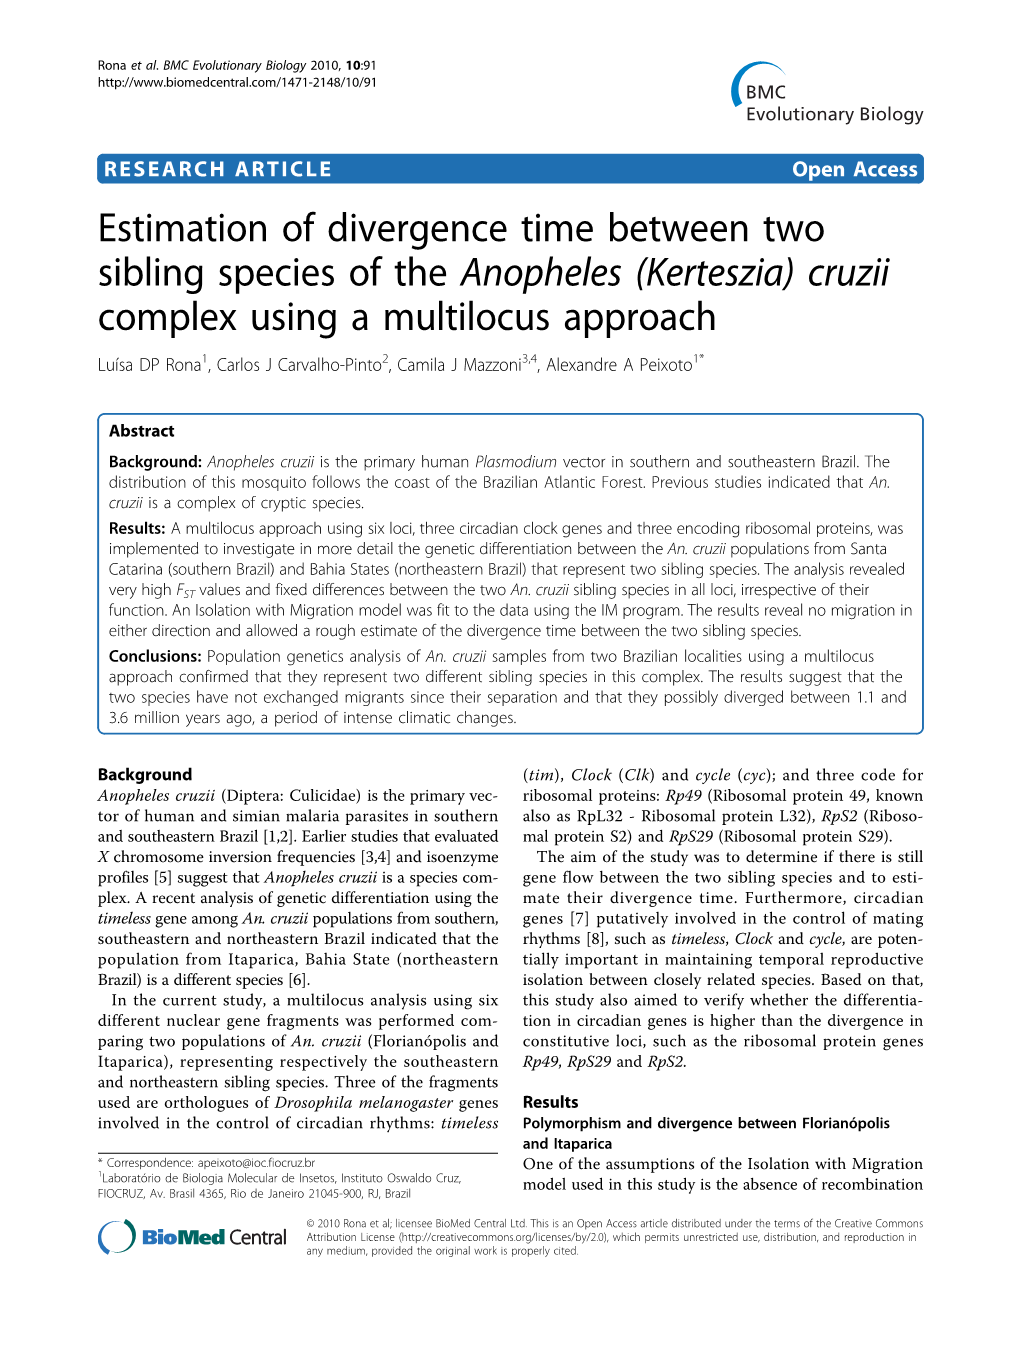 Estimation of Divergence Time Between Two Sibling Species of The